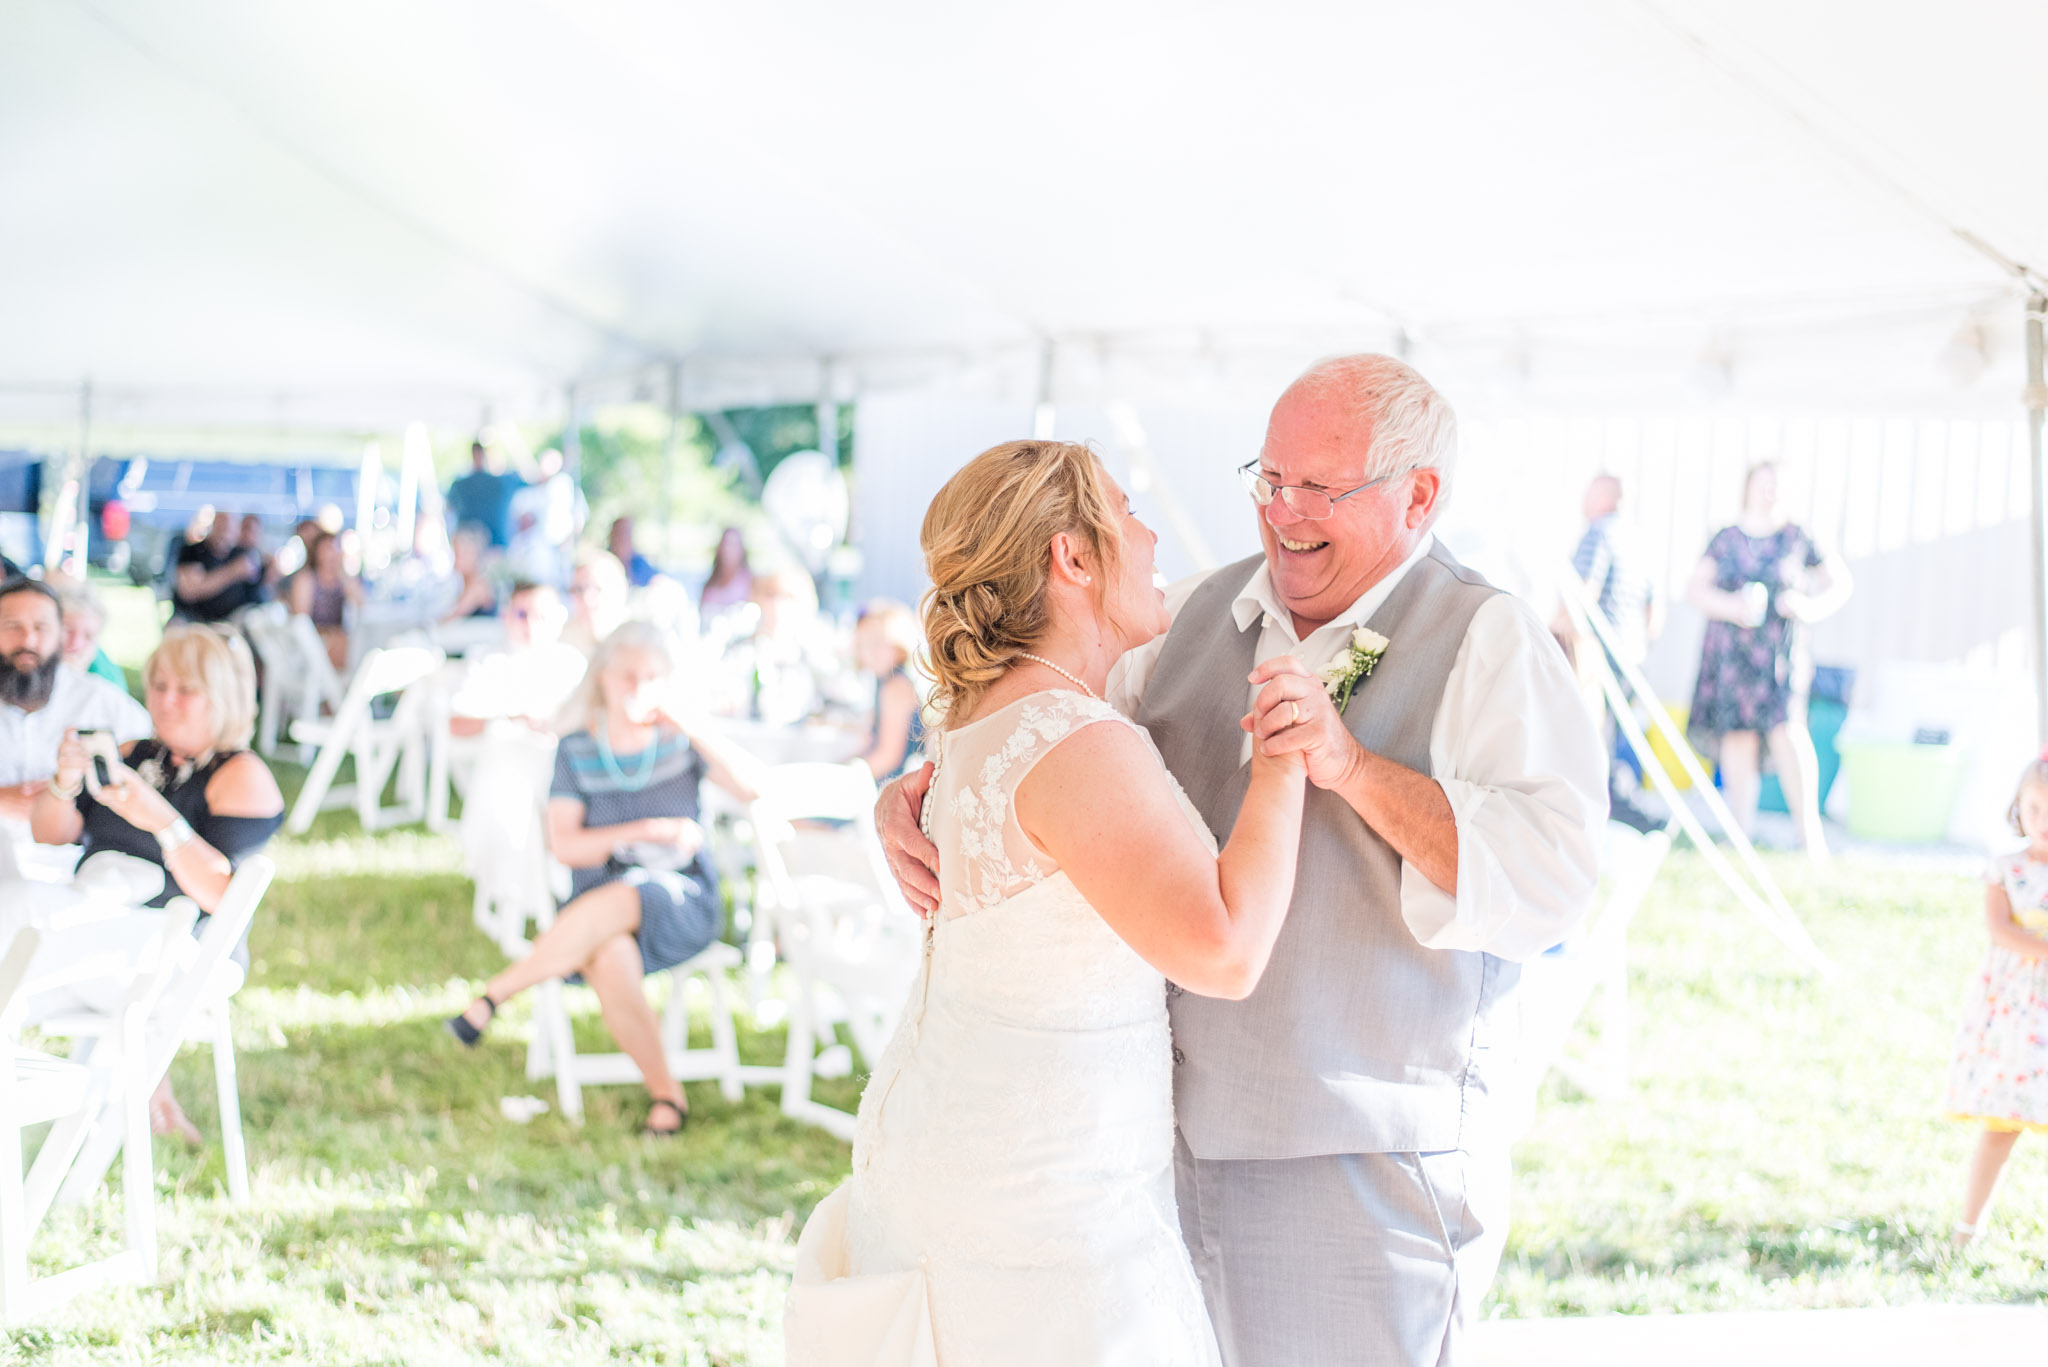 Father and Bride Laugh During Dance at Wedding Reception